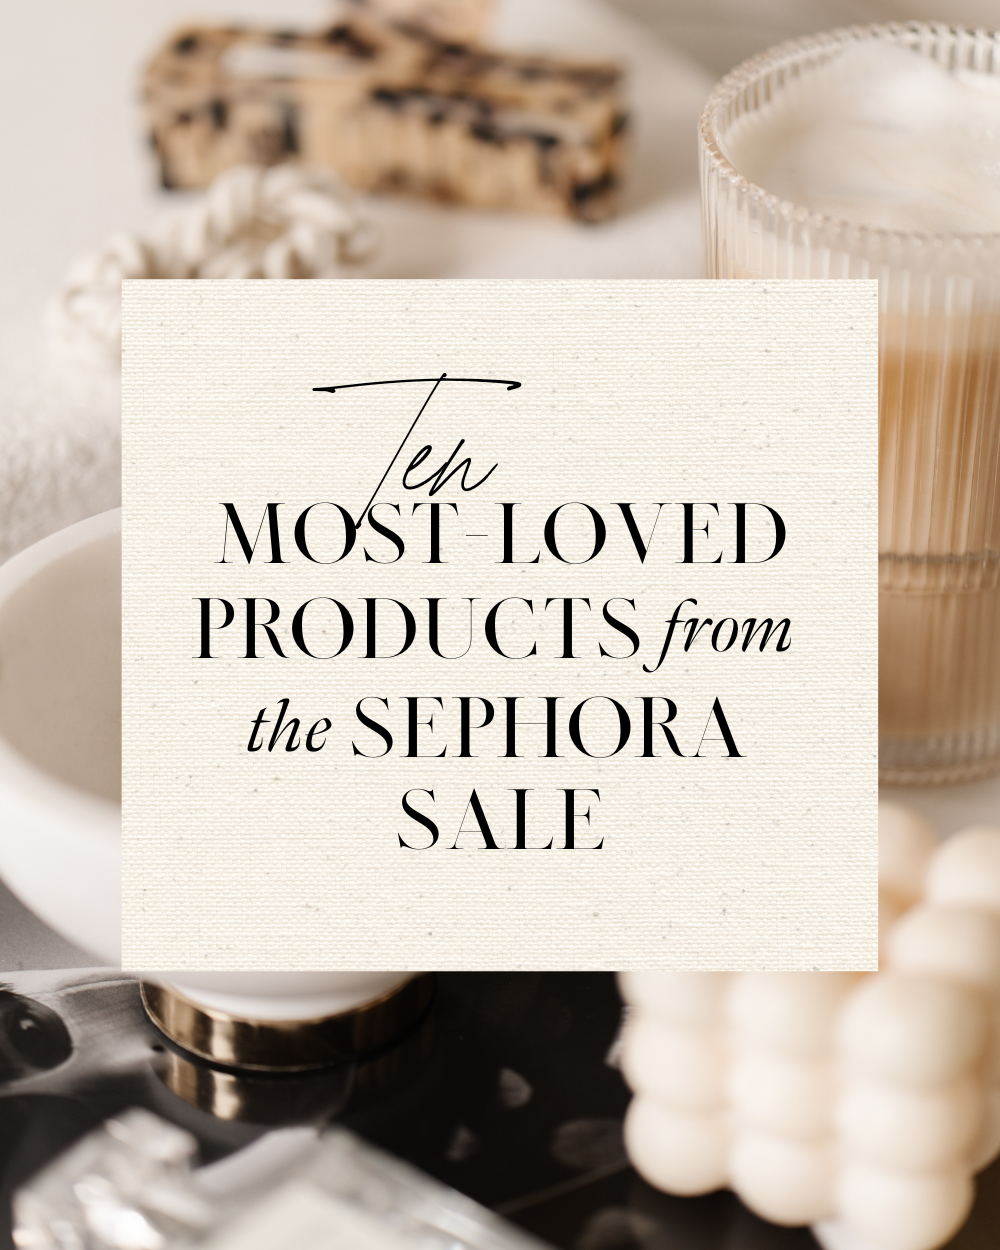 Most loved products sephora sale